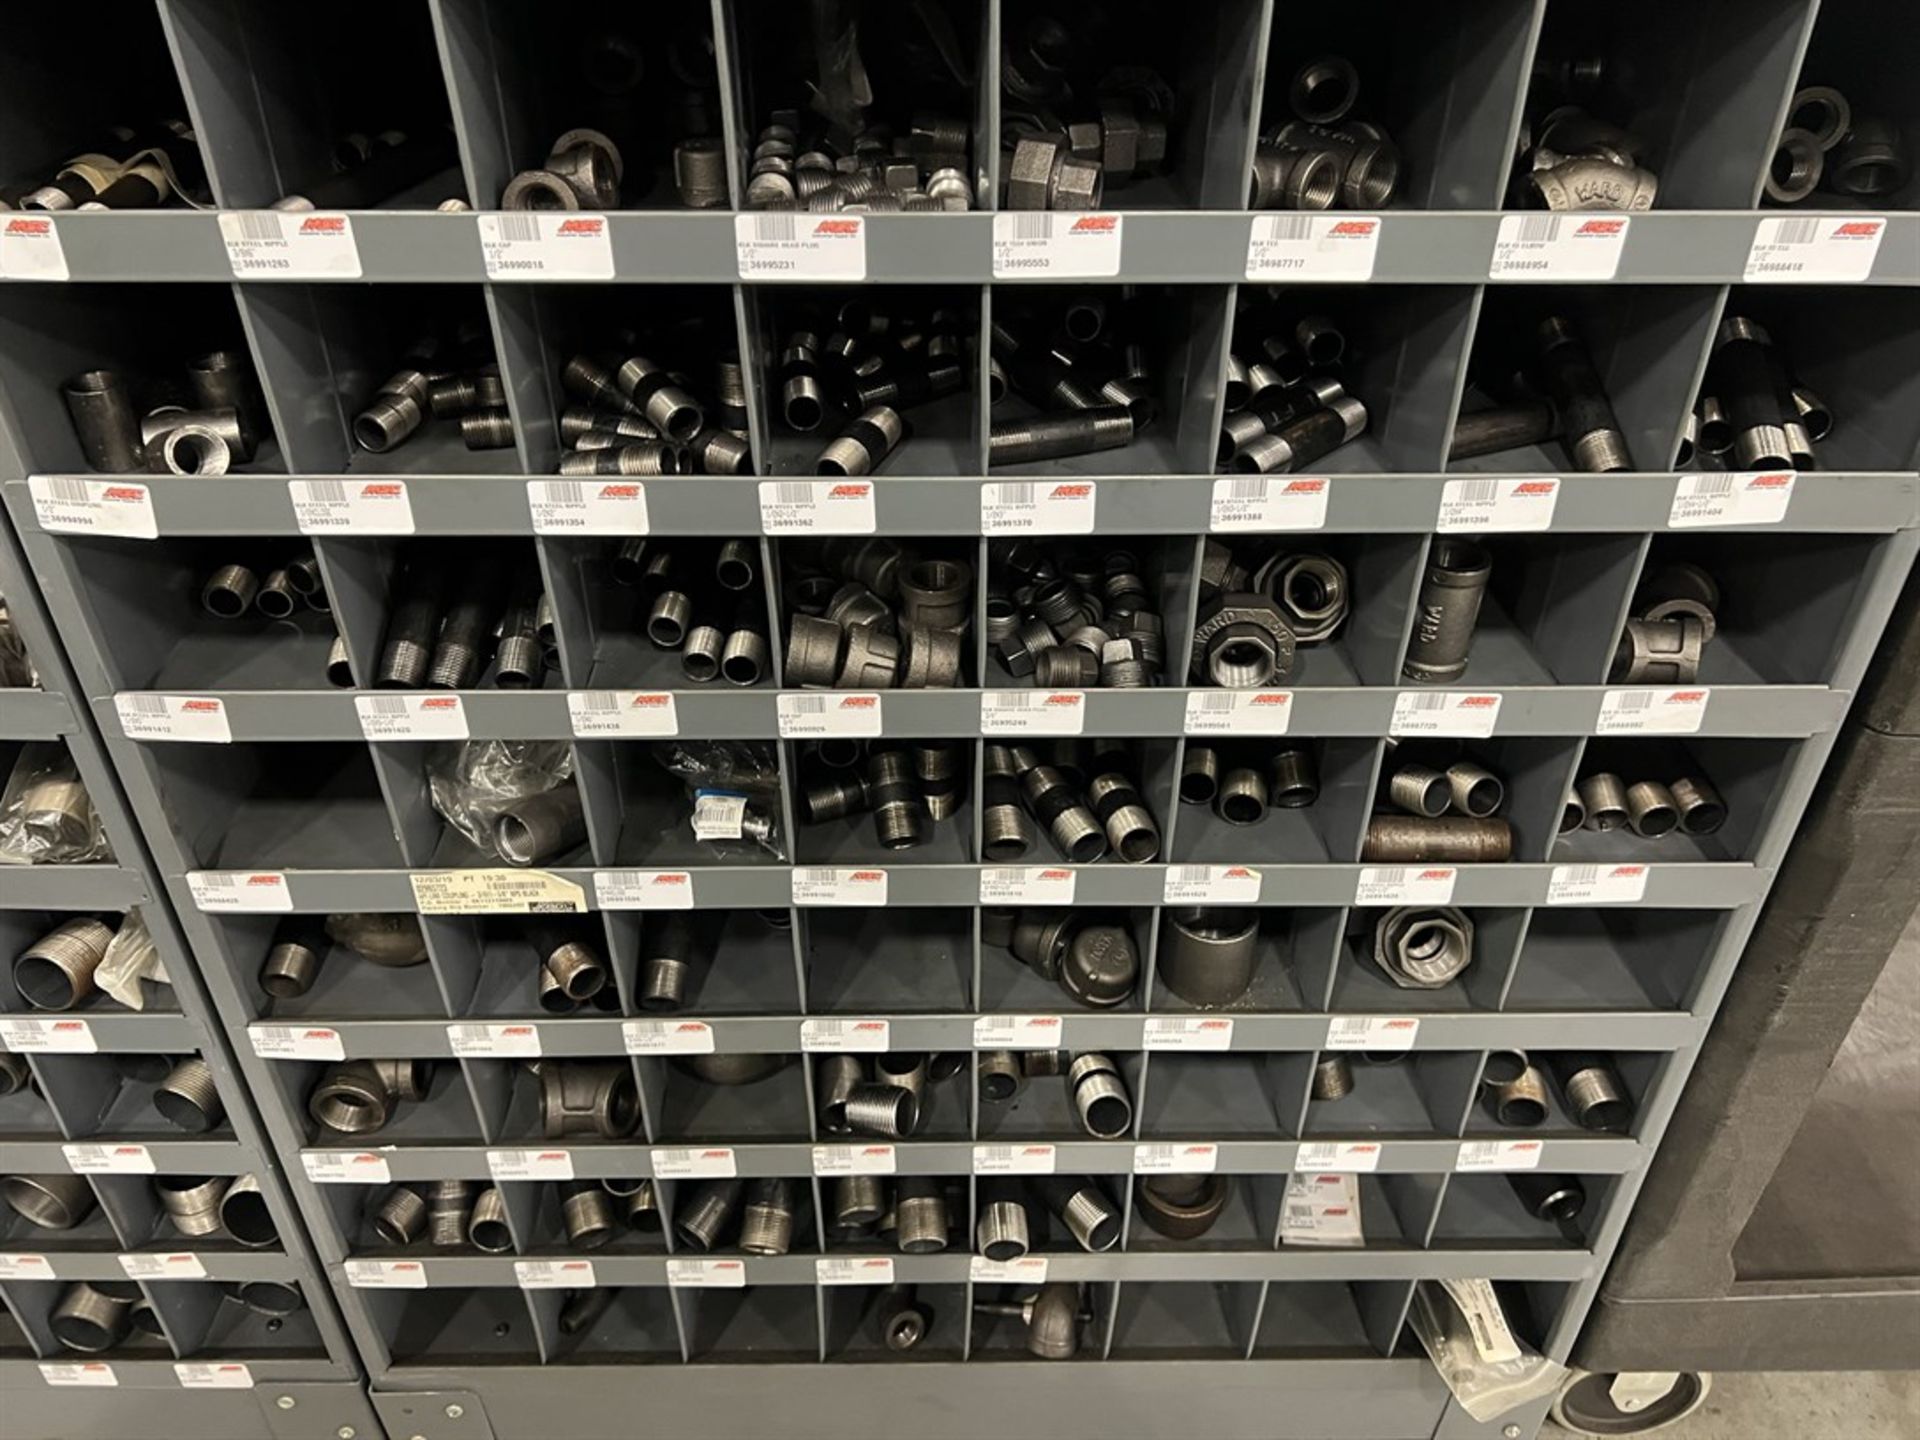 MSC Supply Dual Rack Pigeon Hole Storage System w/ Large Assortment of Fittings - Image 4 of 7